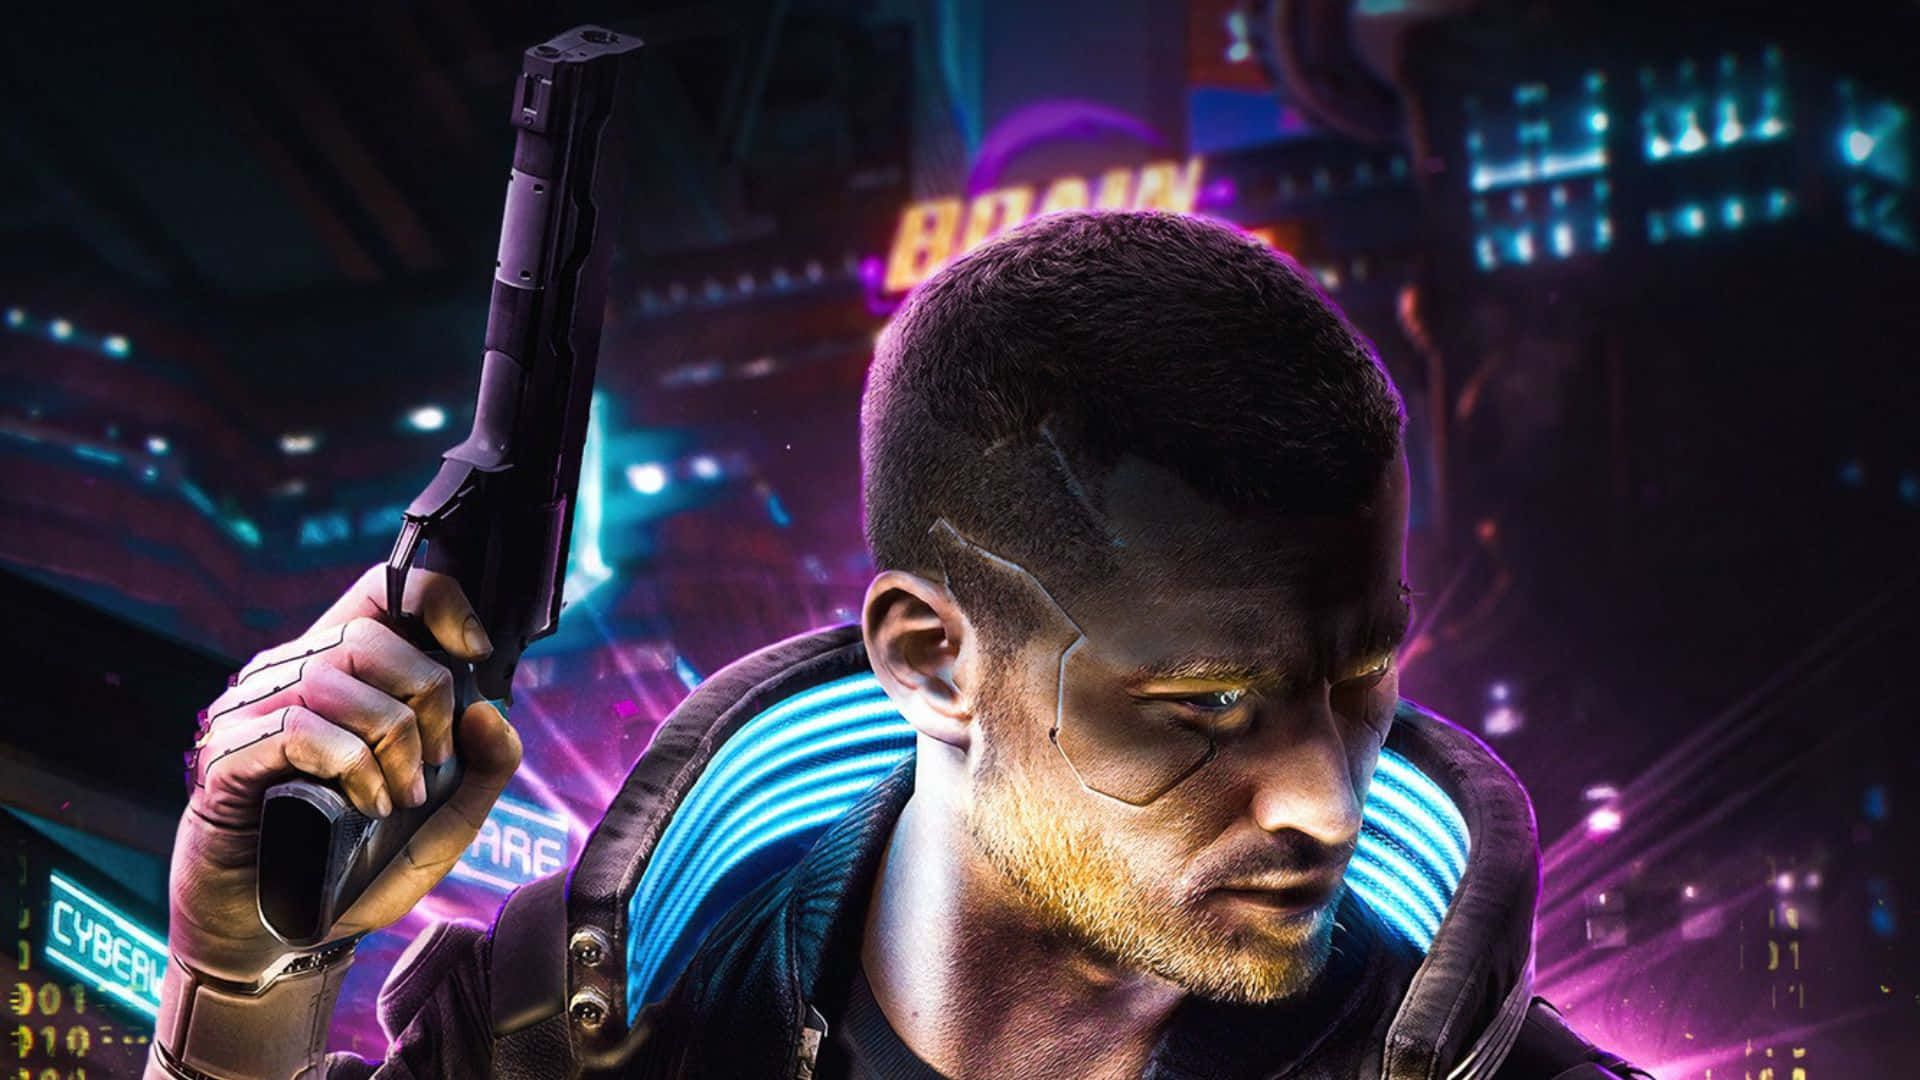 Futuristic characters in the world of Cyberpunk 2077 Wallpaper